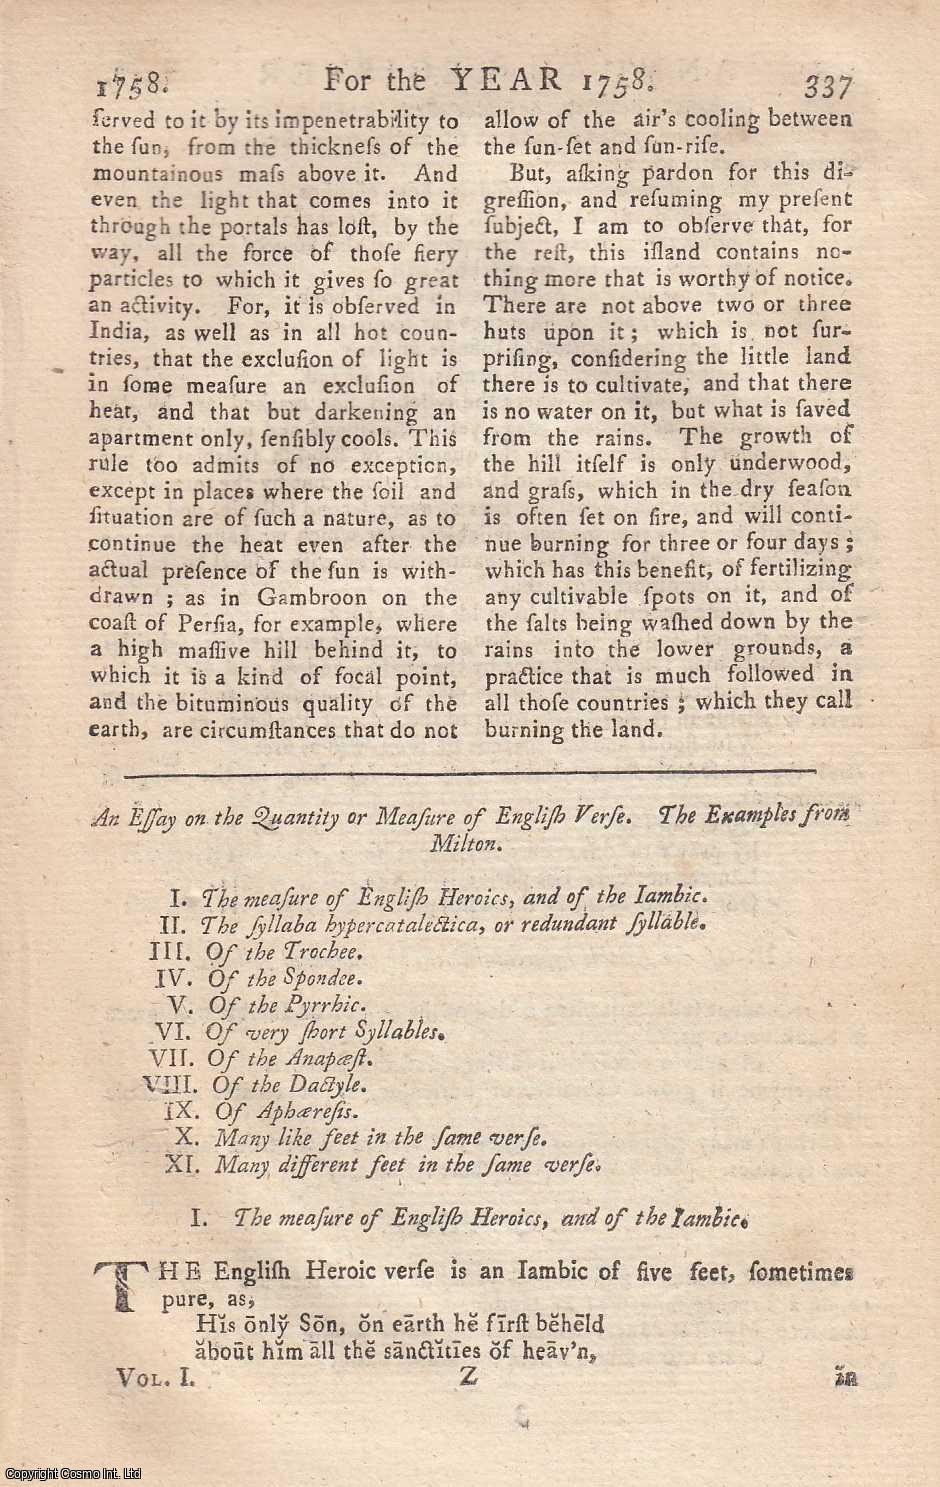 Edmund Burke - An Essay on the Quantity or Measure of English Verse. The Examples from Milton. An original article from the Annual Register for 1758.